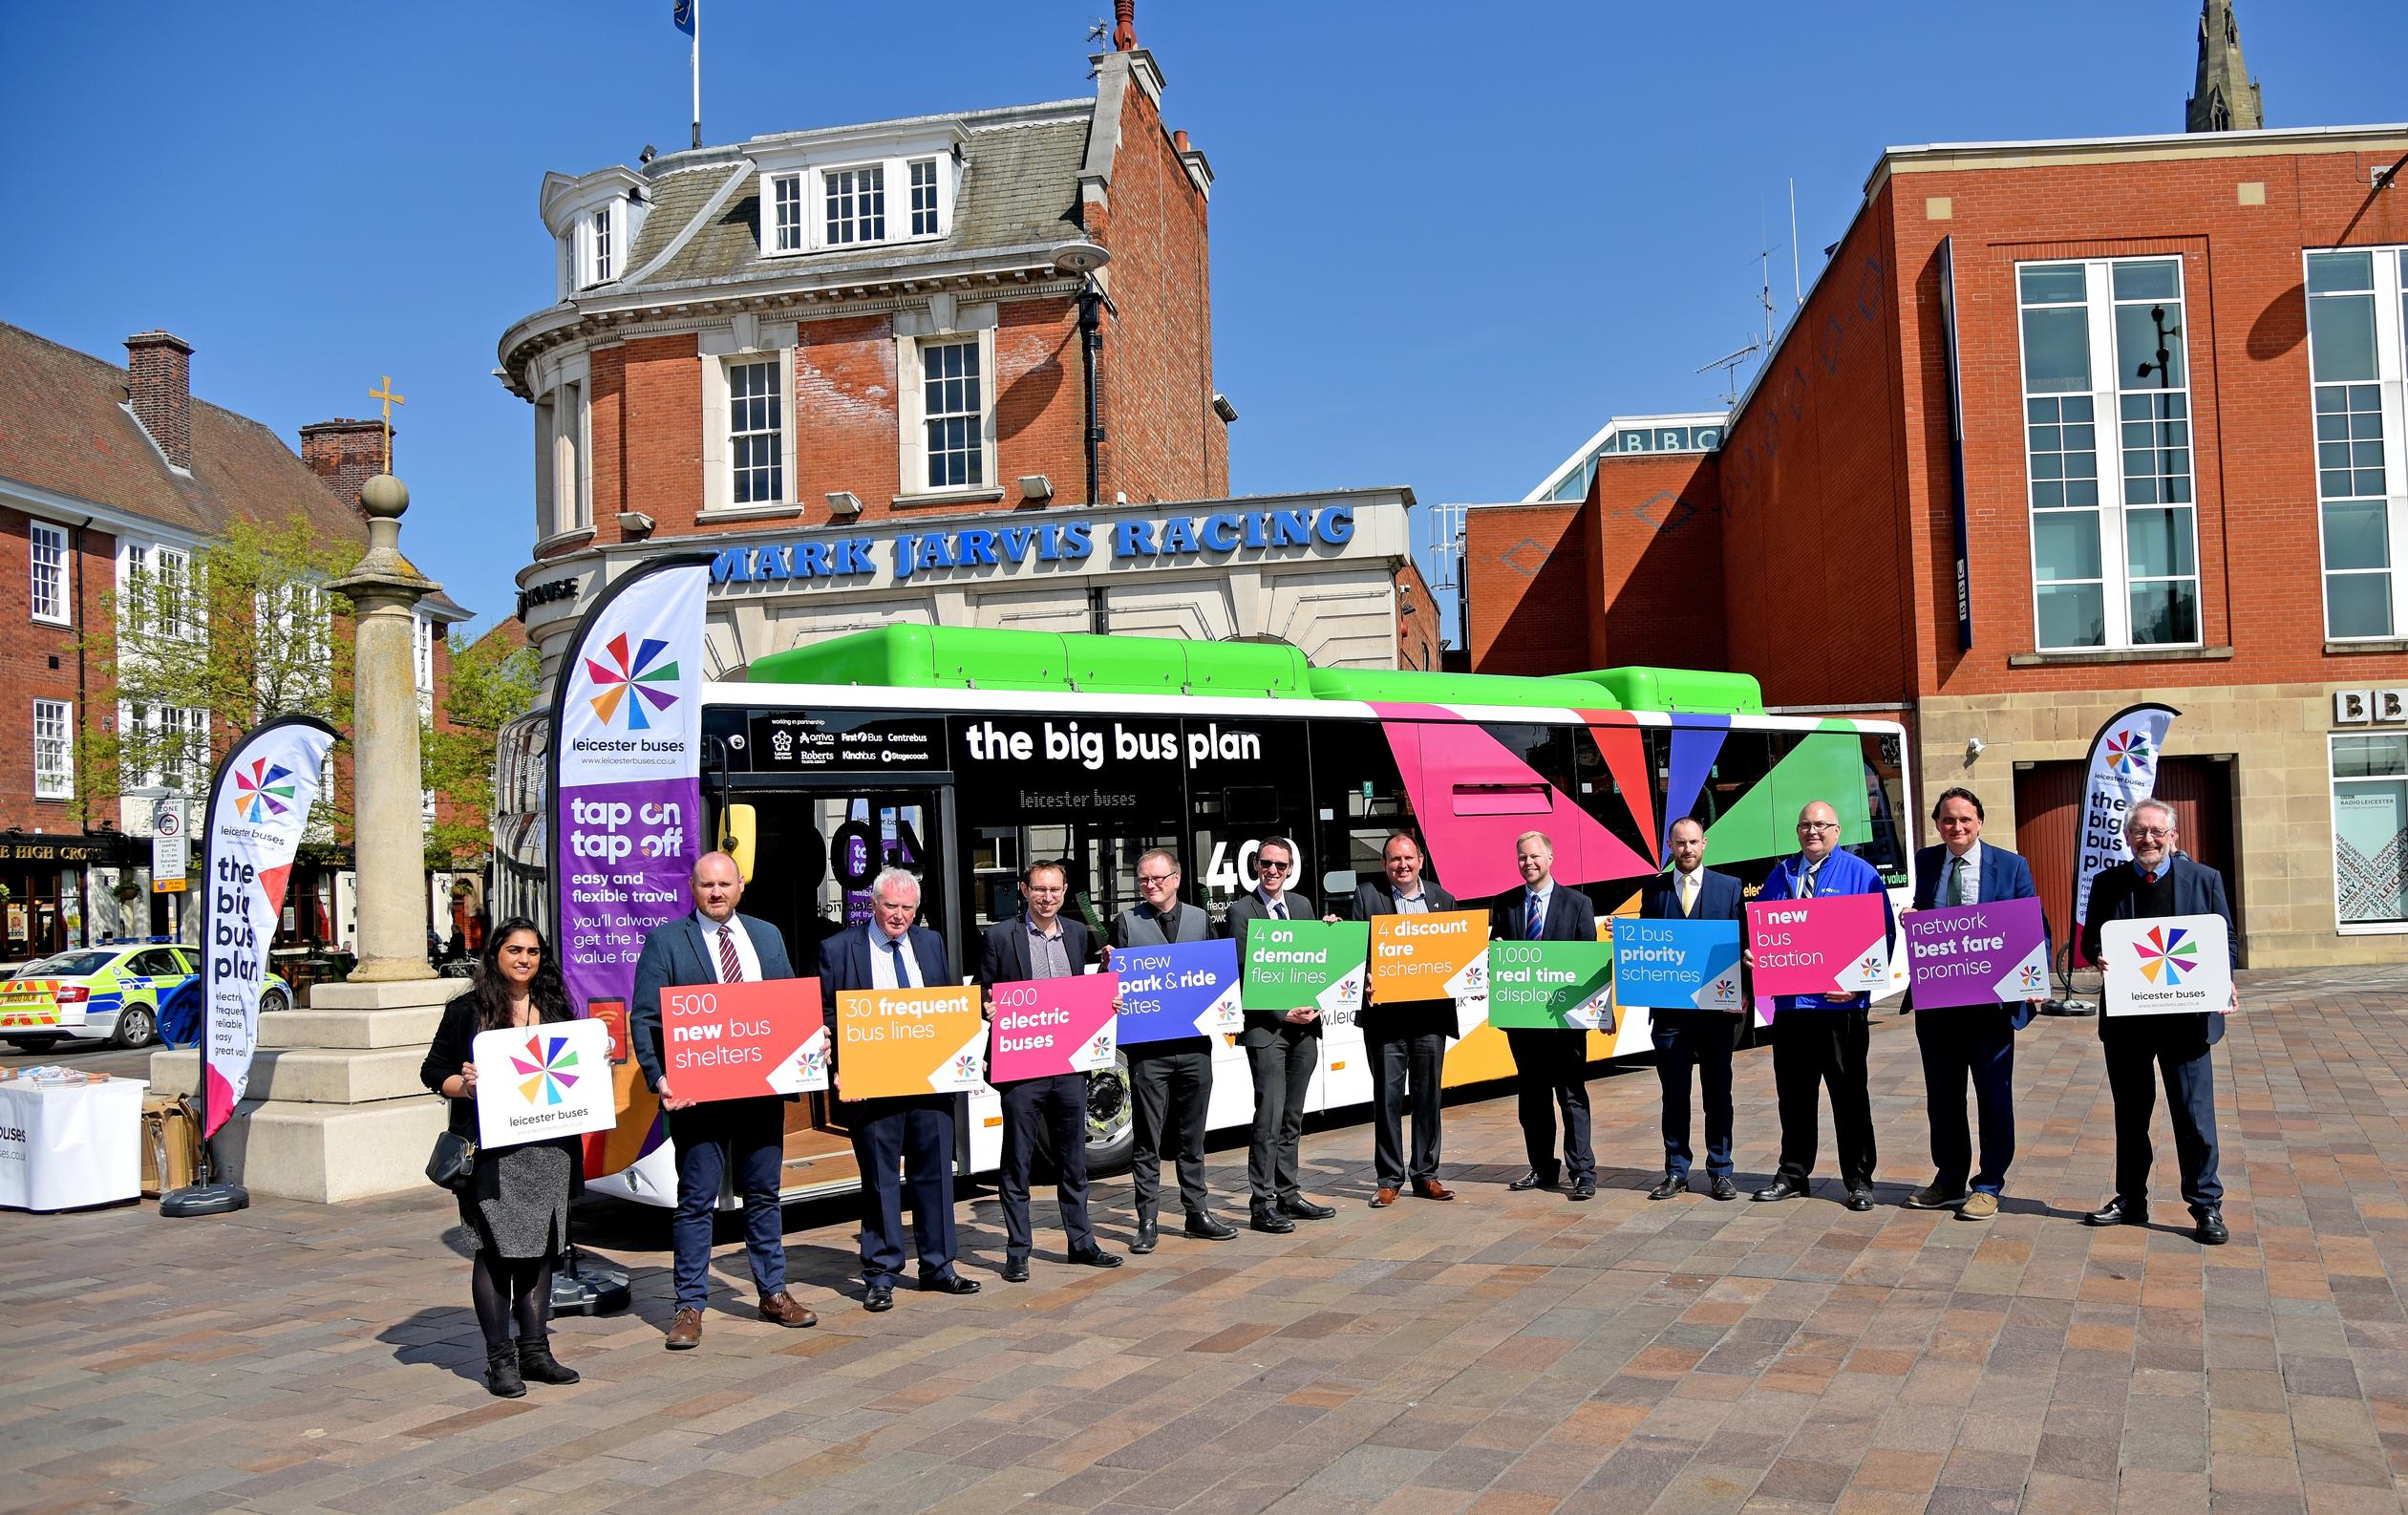 Leicester looks to workplace levy to fund bus plan after BSIP setback